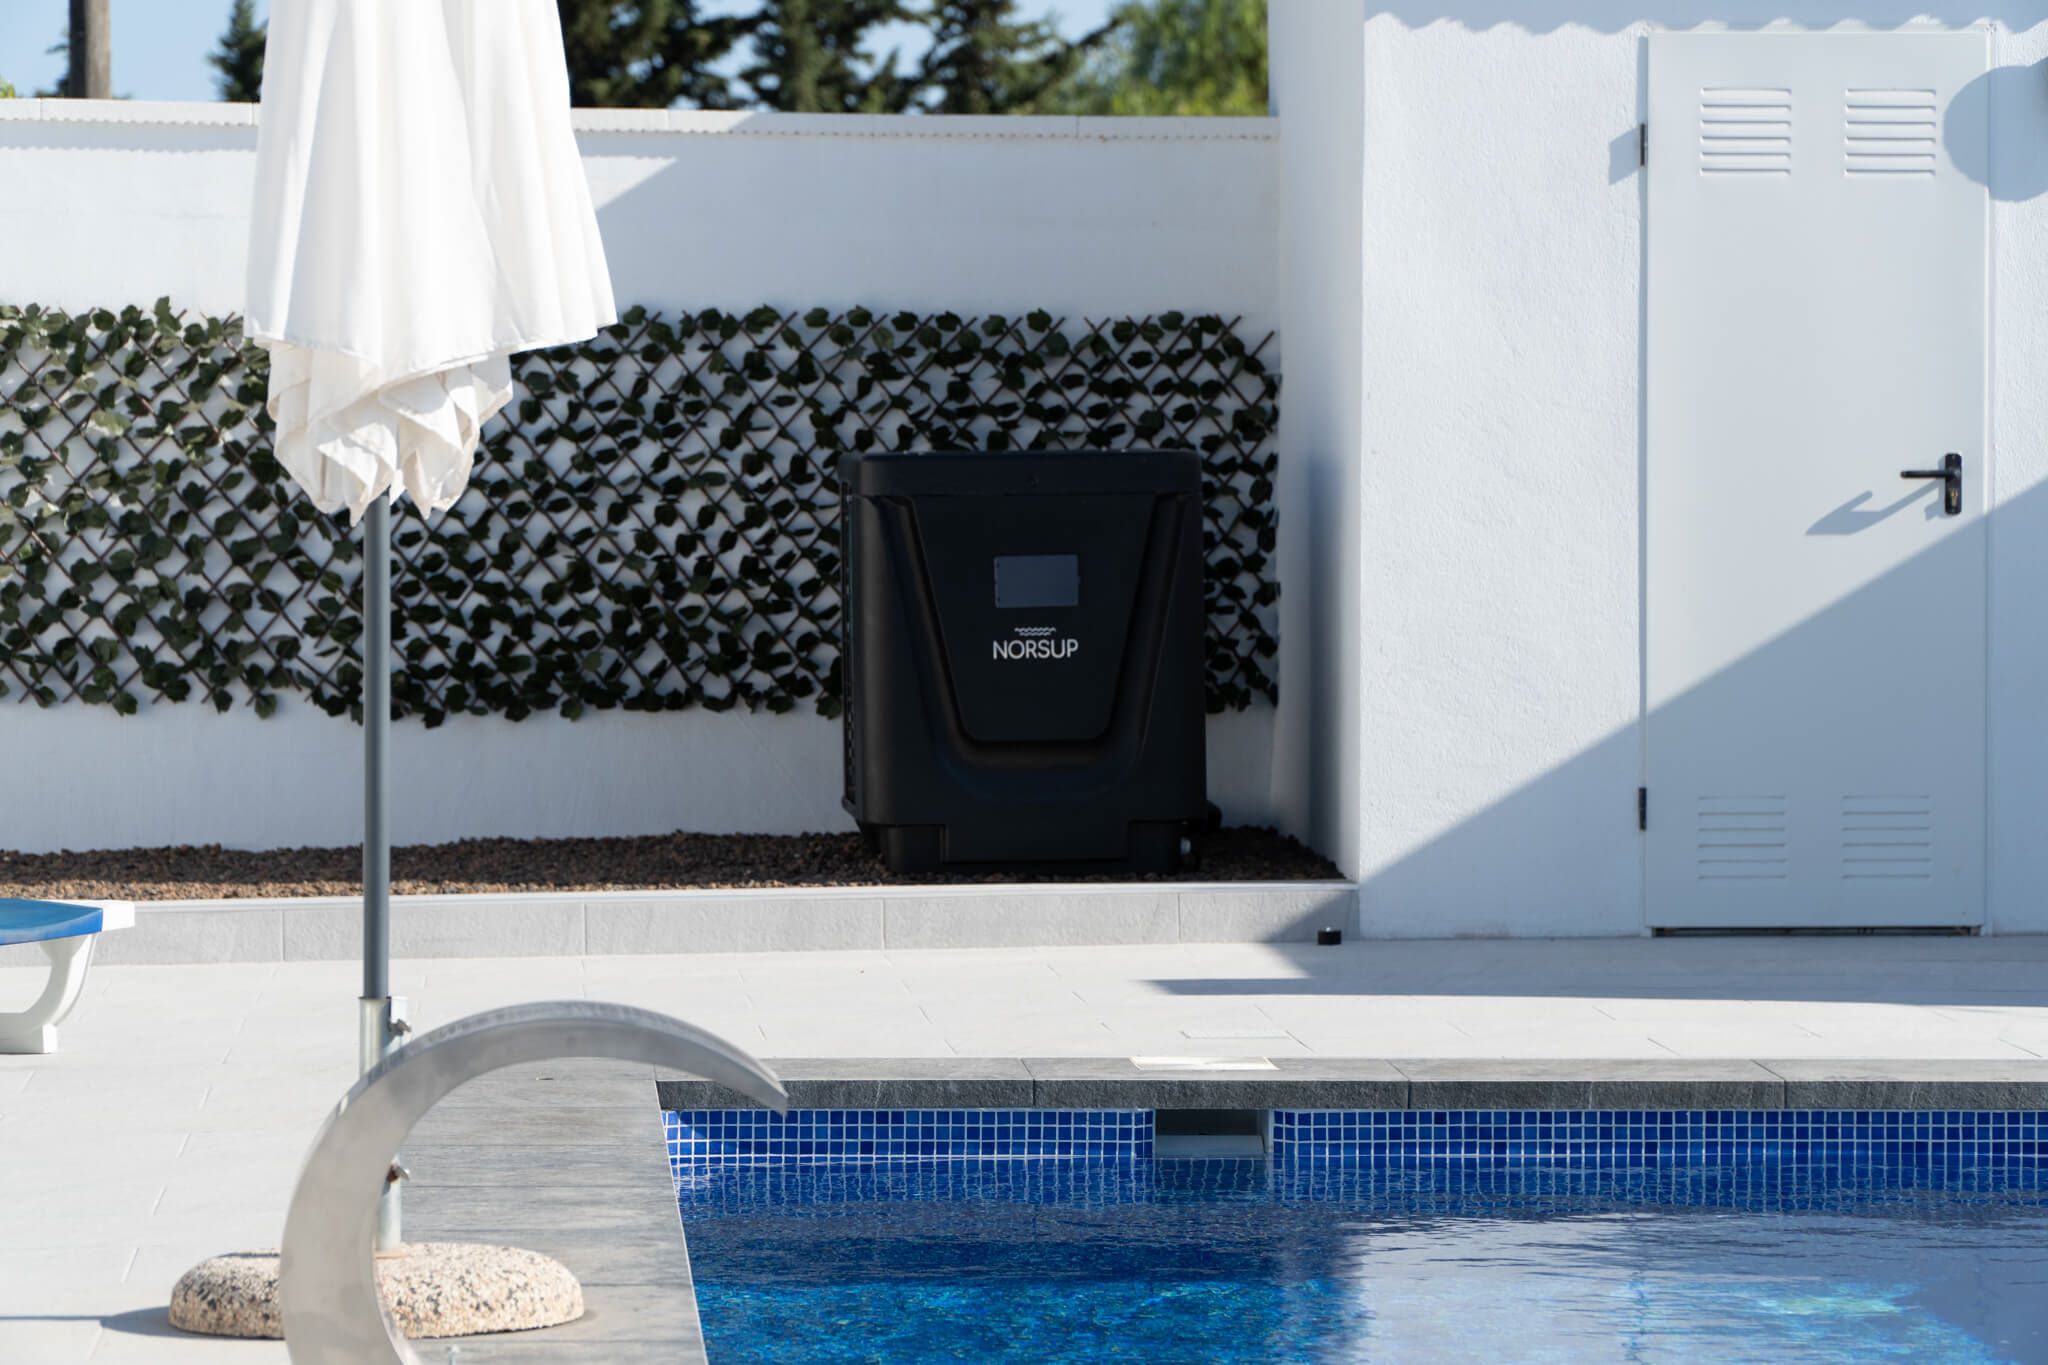 Swimming Pool Heat Exchanger: How It Works